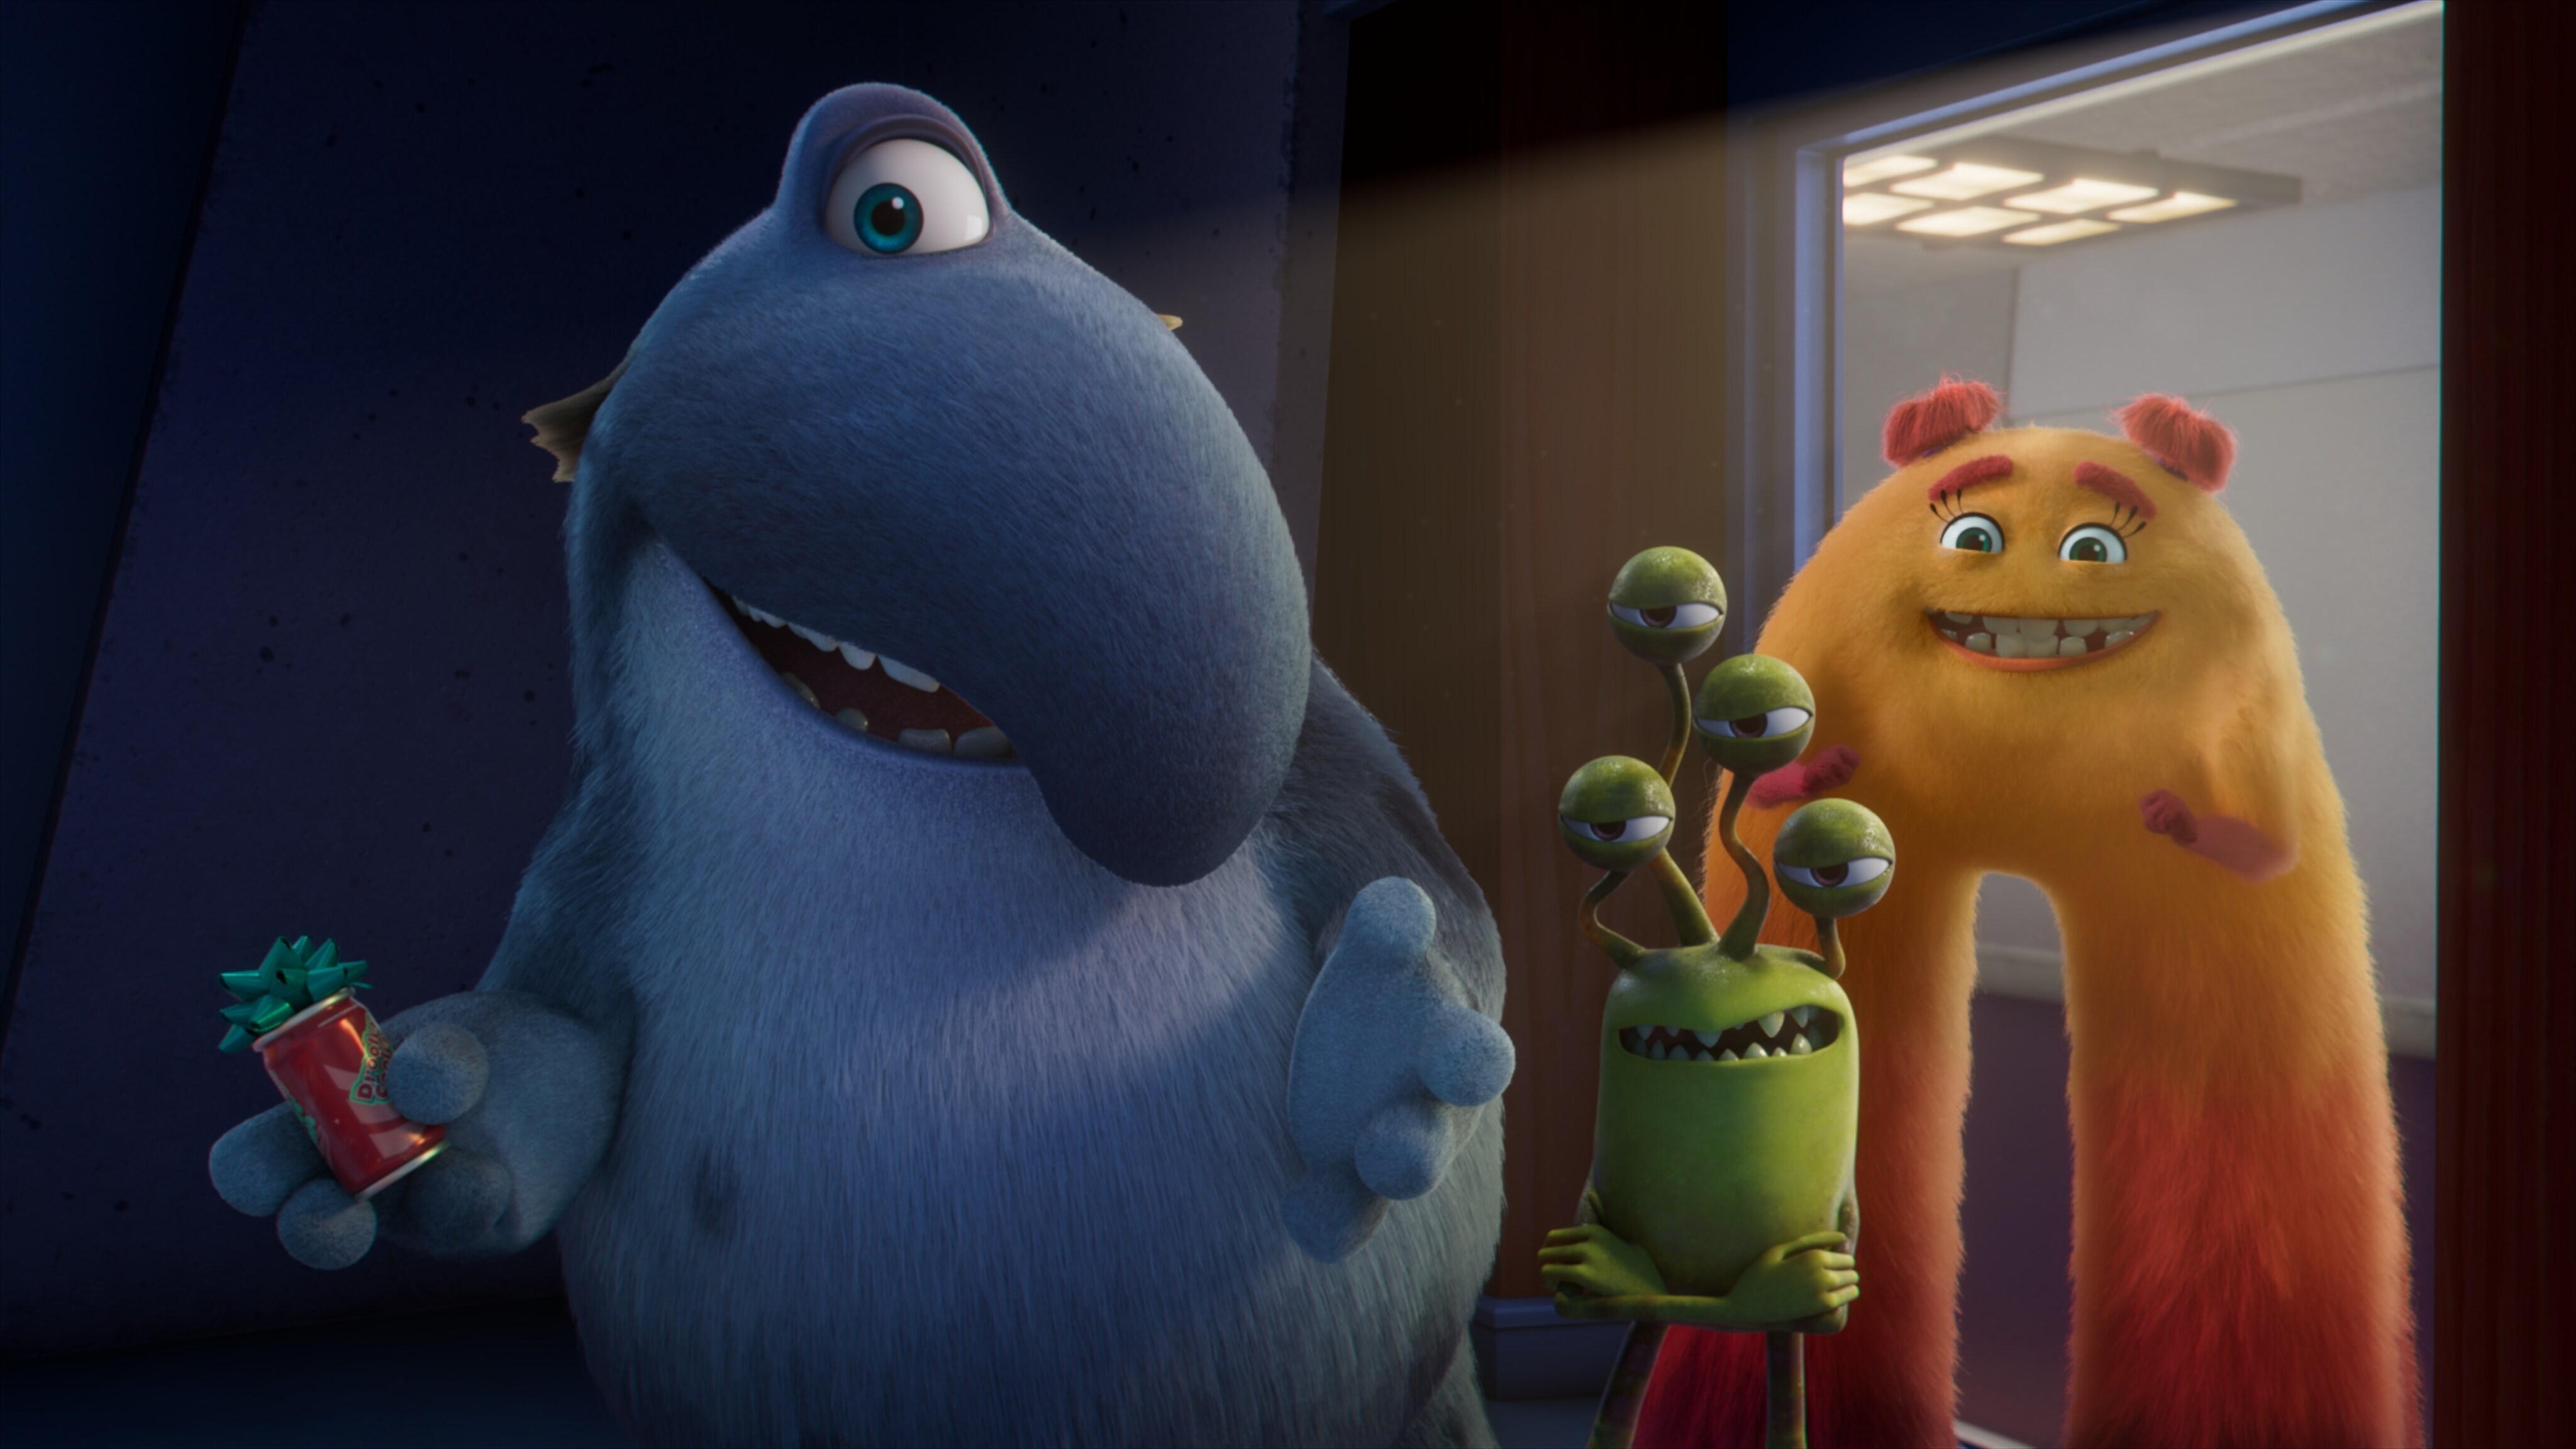 MONSTERS AT WORK - "Meet Mift" - When Tylor is initiated into MIFT during a bizarre ritual, he wants nothing more than to get away from his odd coworkers.  But when an emergency strikes Monsters, Inc., MIFT kicks into action and Tylor develops a hint of respect for the misfit team. (Disney) FRITZ, DUNCAN, VAL